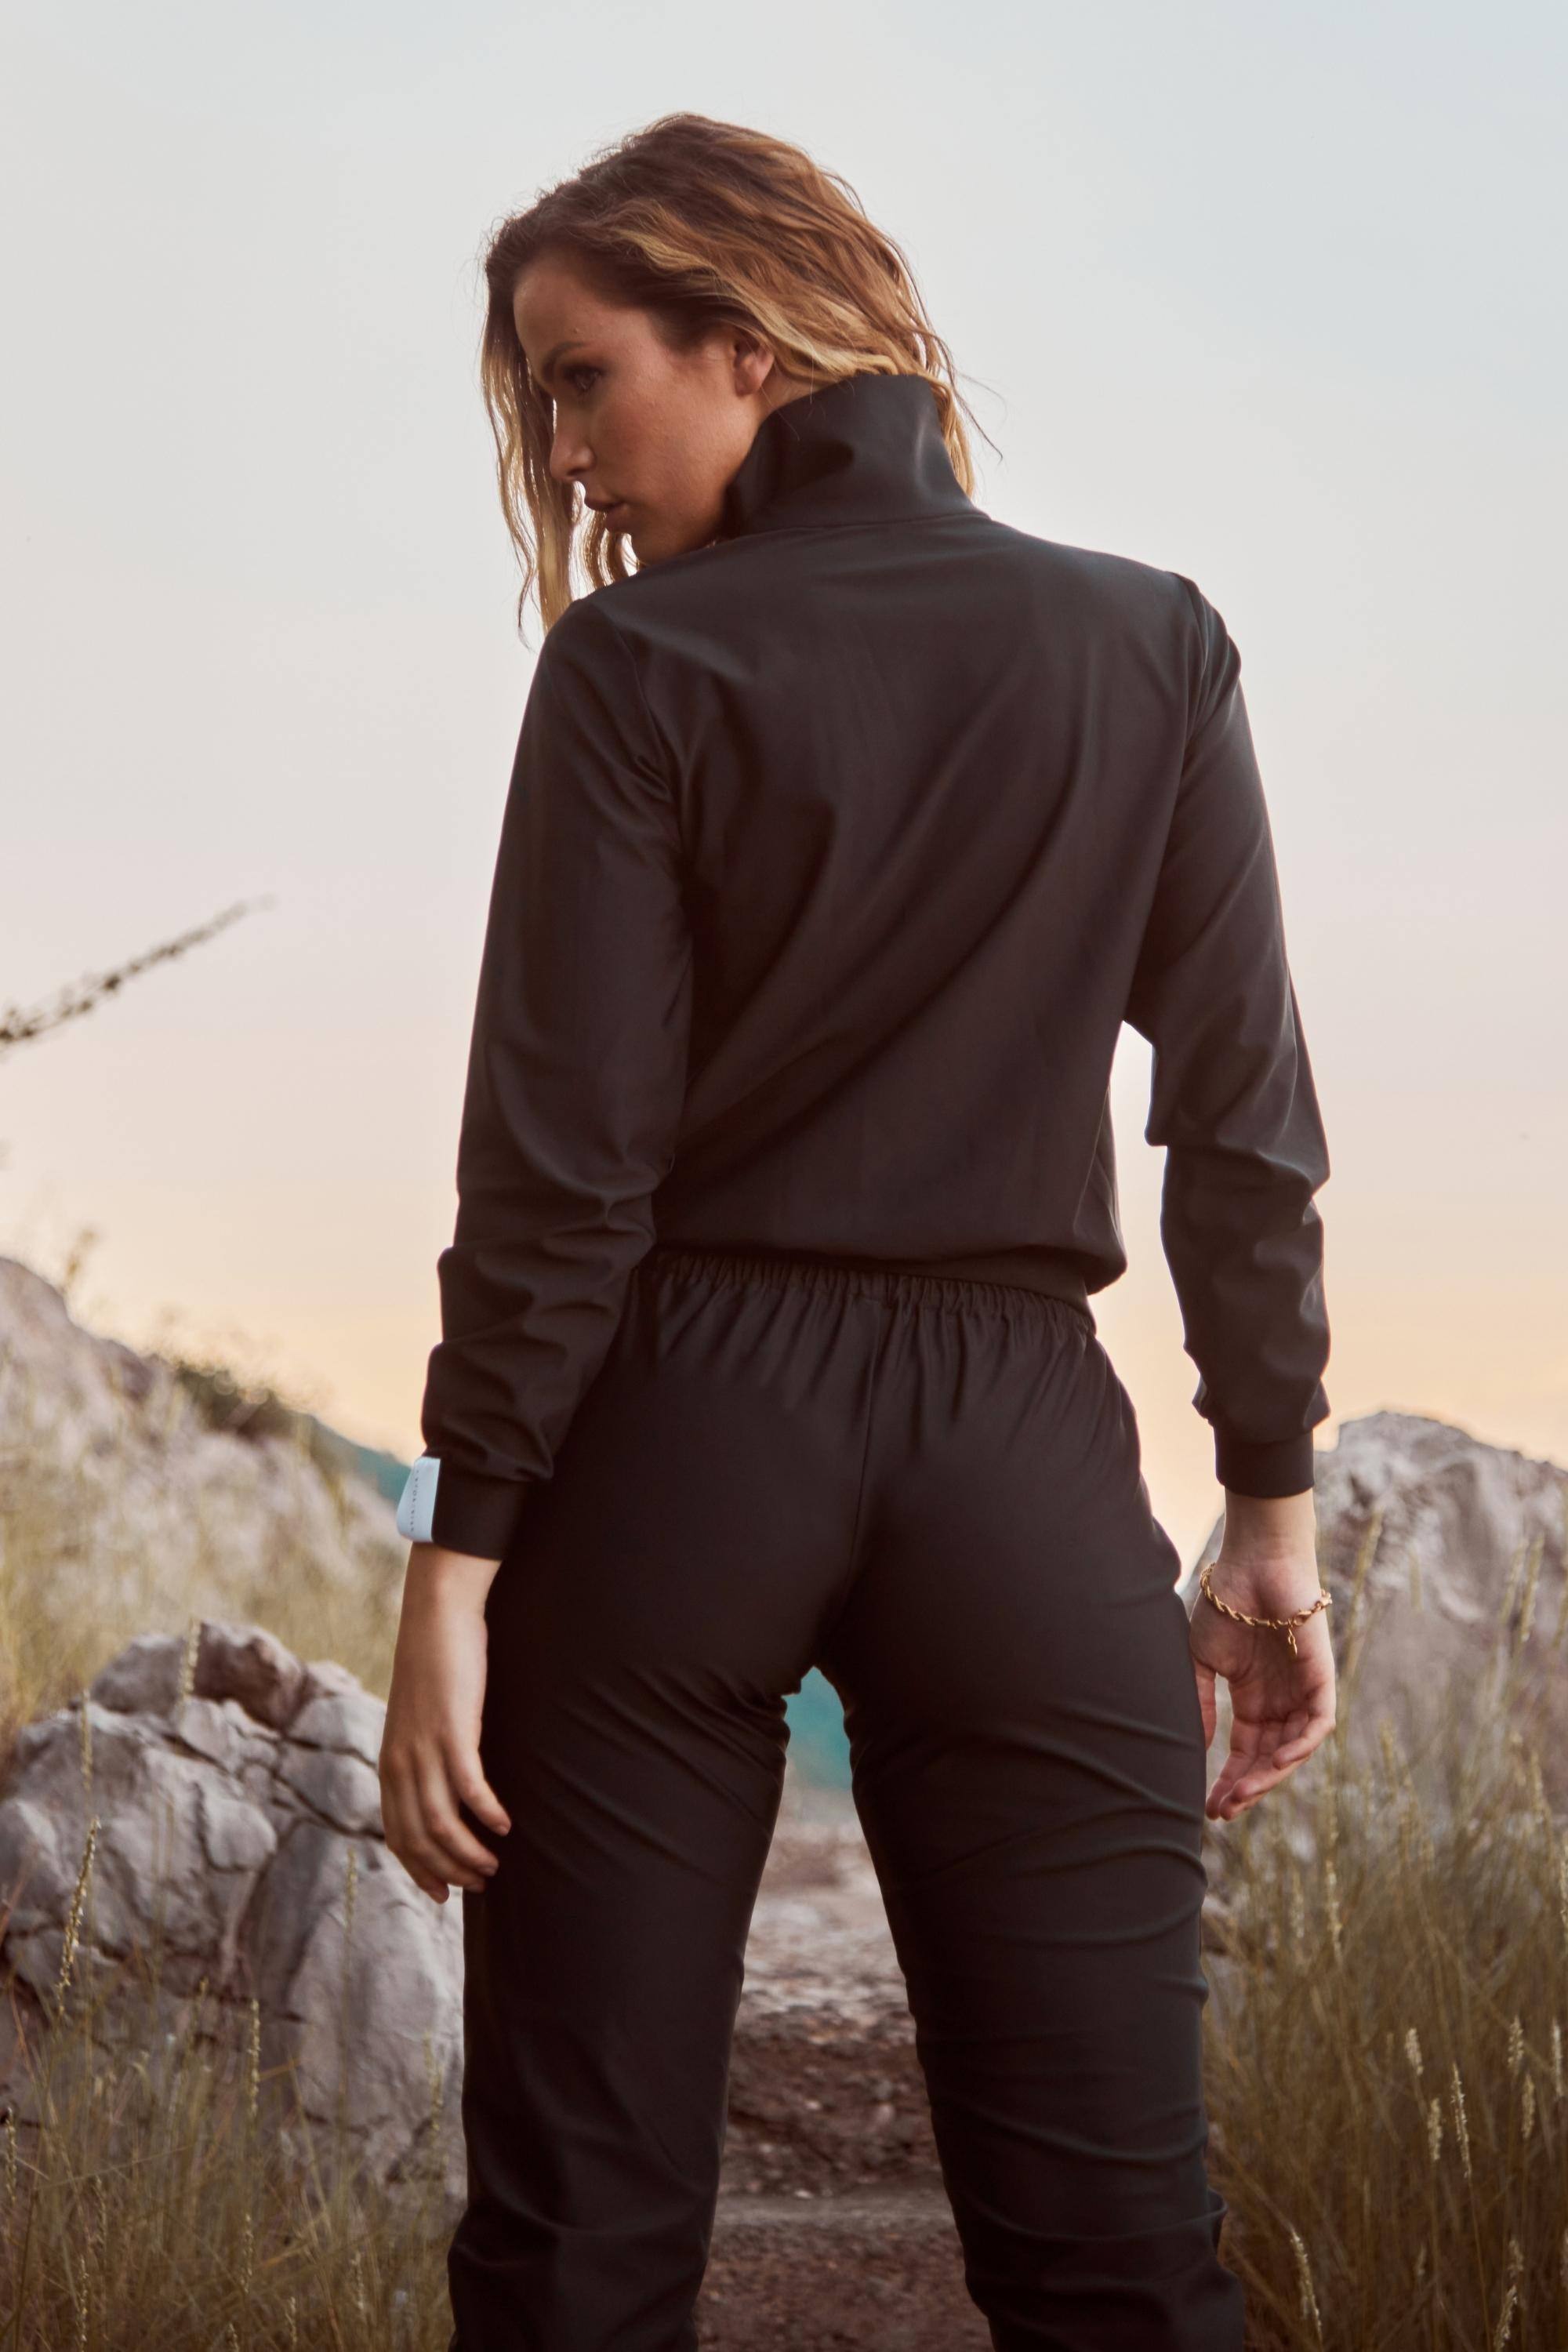 Women's Luxury Tracksuits  Find the perfect outfit for any occasion -  Antoninias